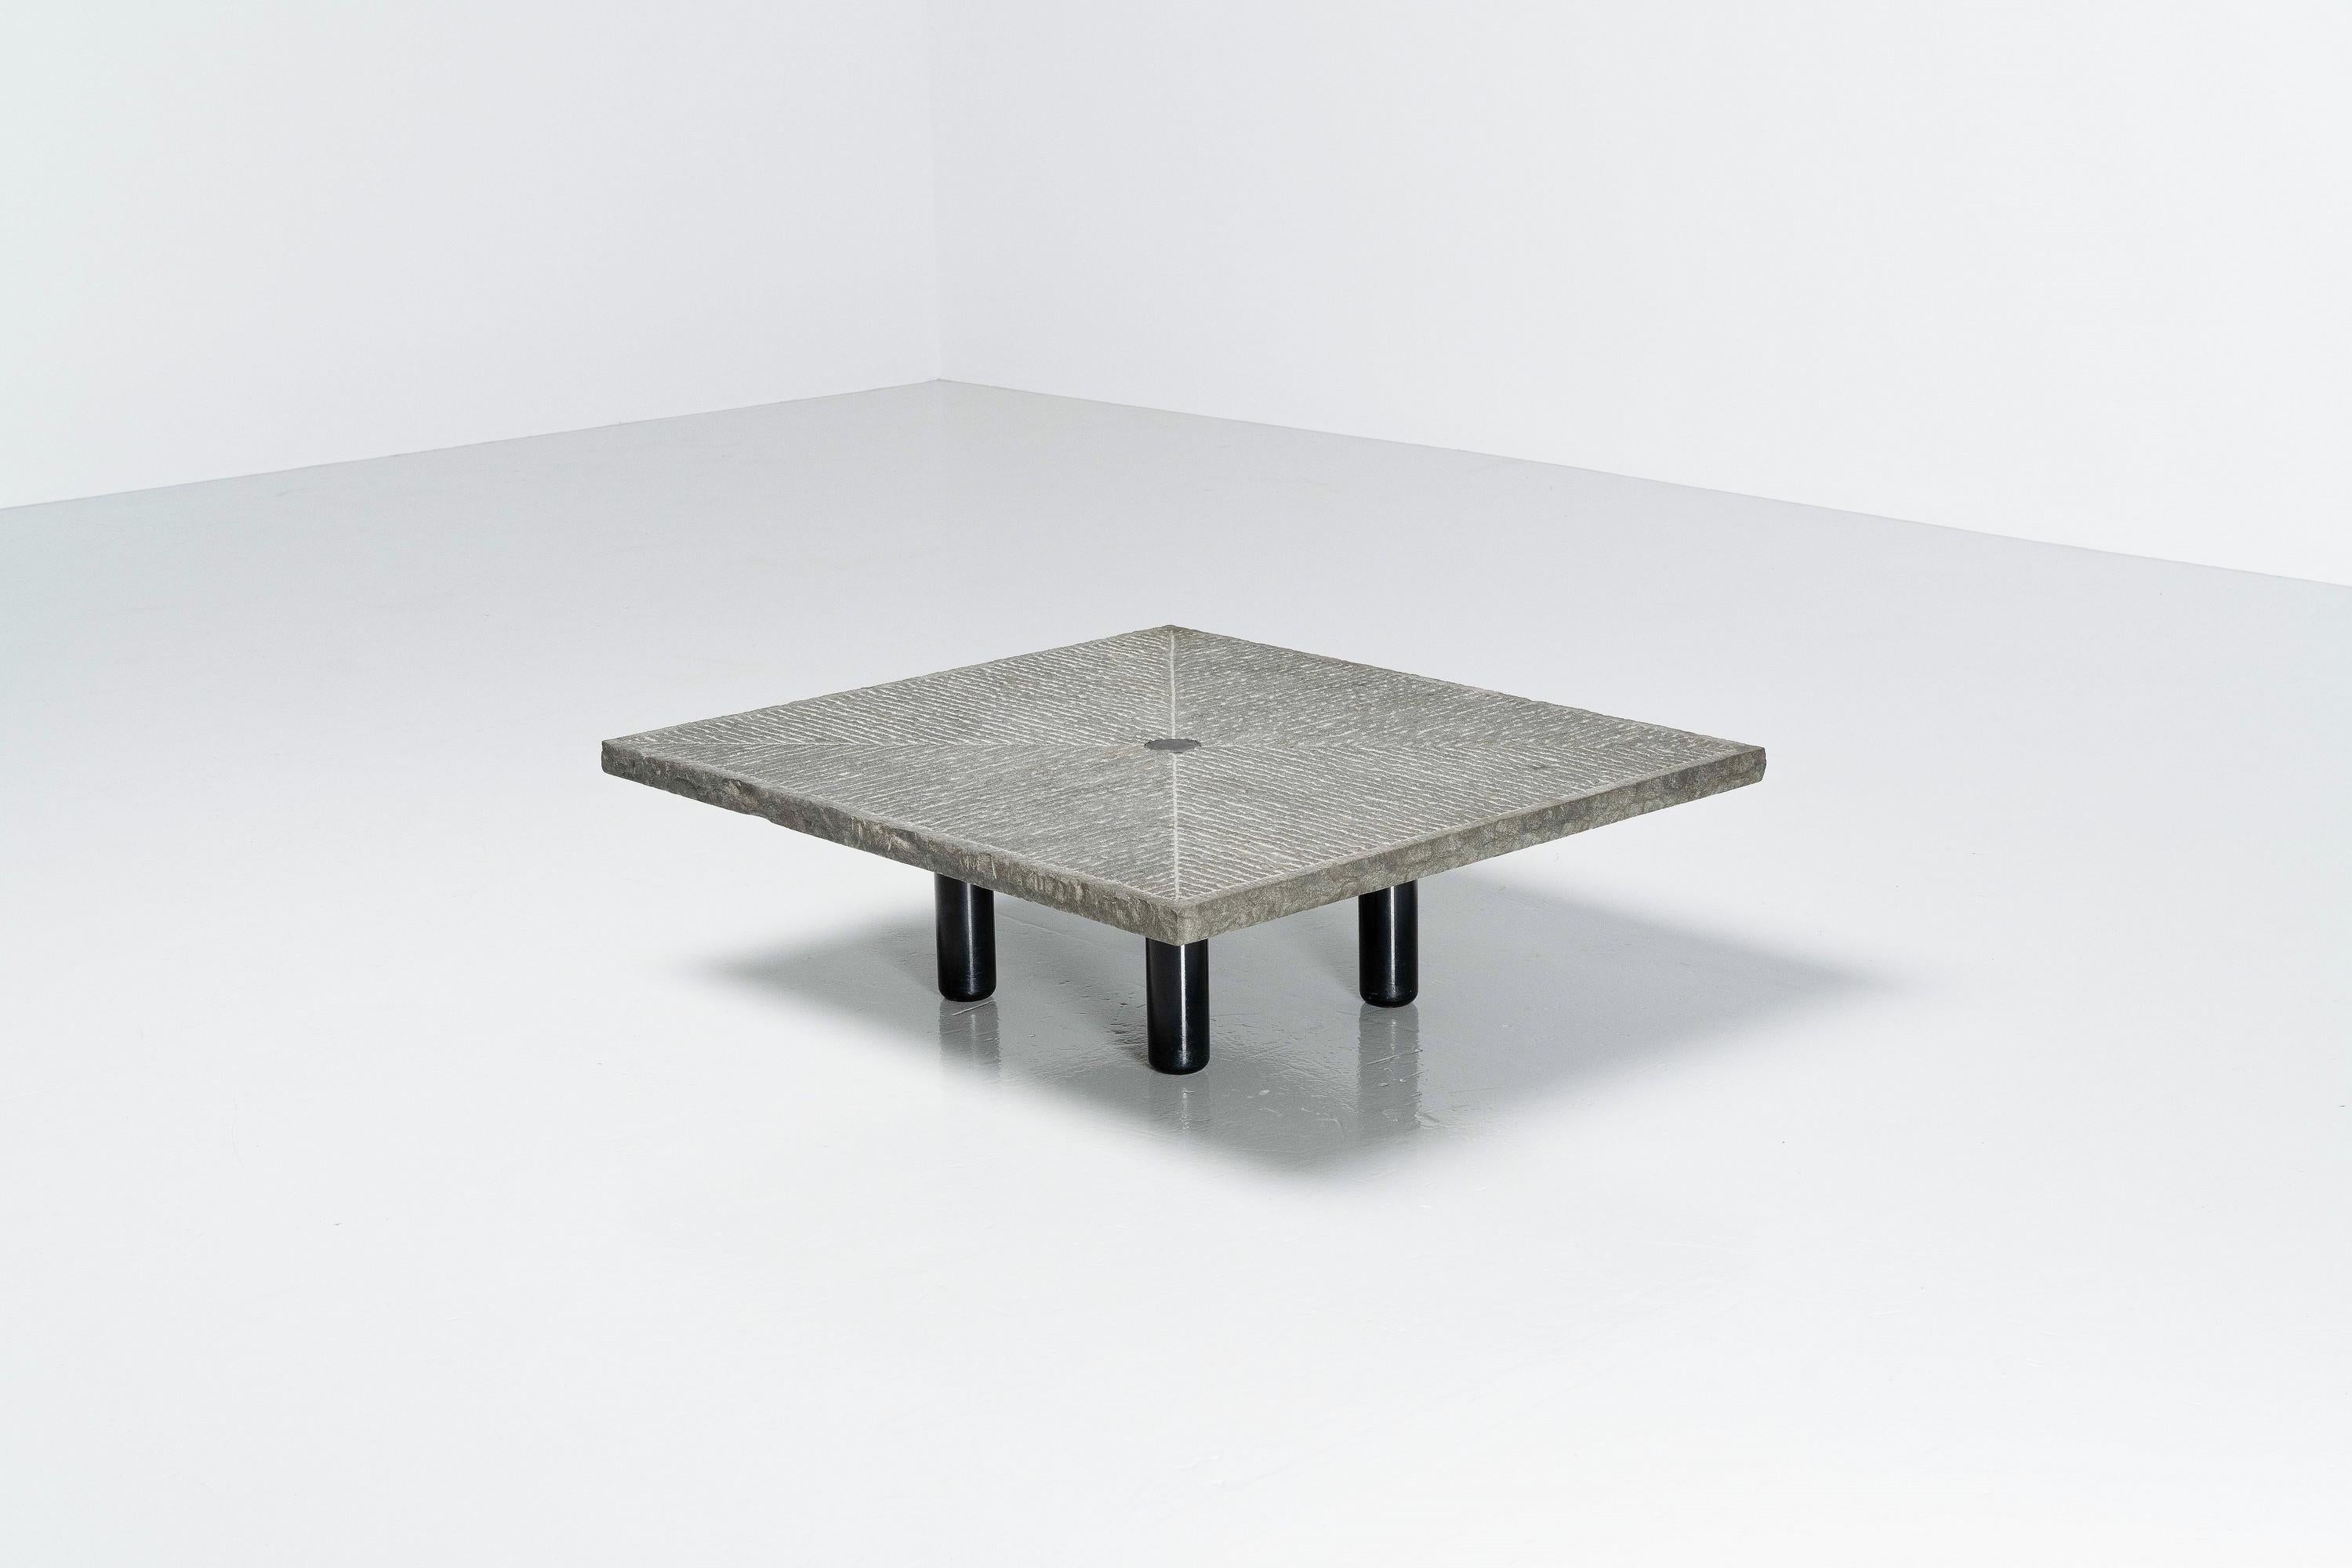 Very quirky and interesting sculptural coffee table designed by architect Giulio Lazzotti and produced by Mageia in Italy, 1981. This table is in good condition and is made of a black painted steel base with an etched grindstone top, with in the